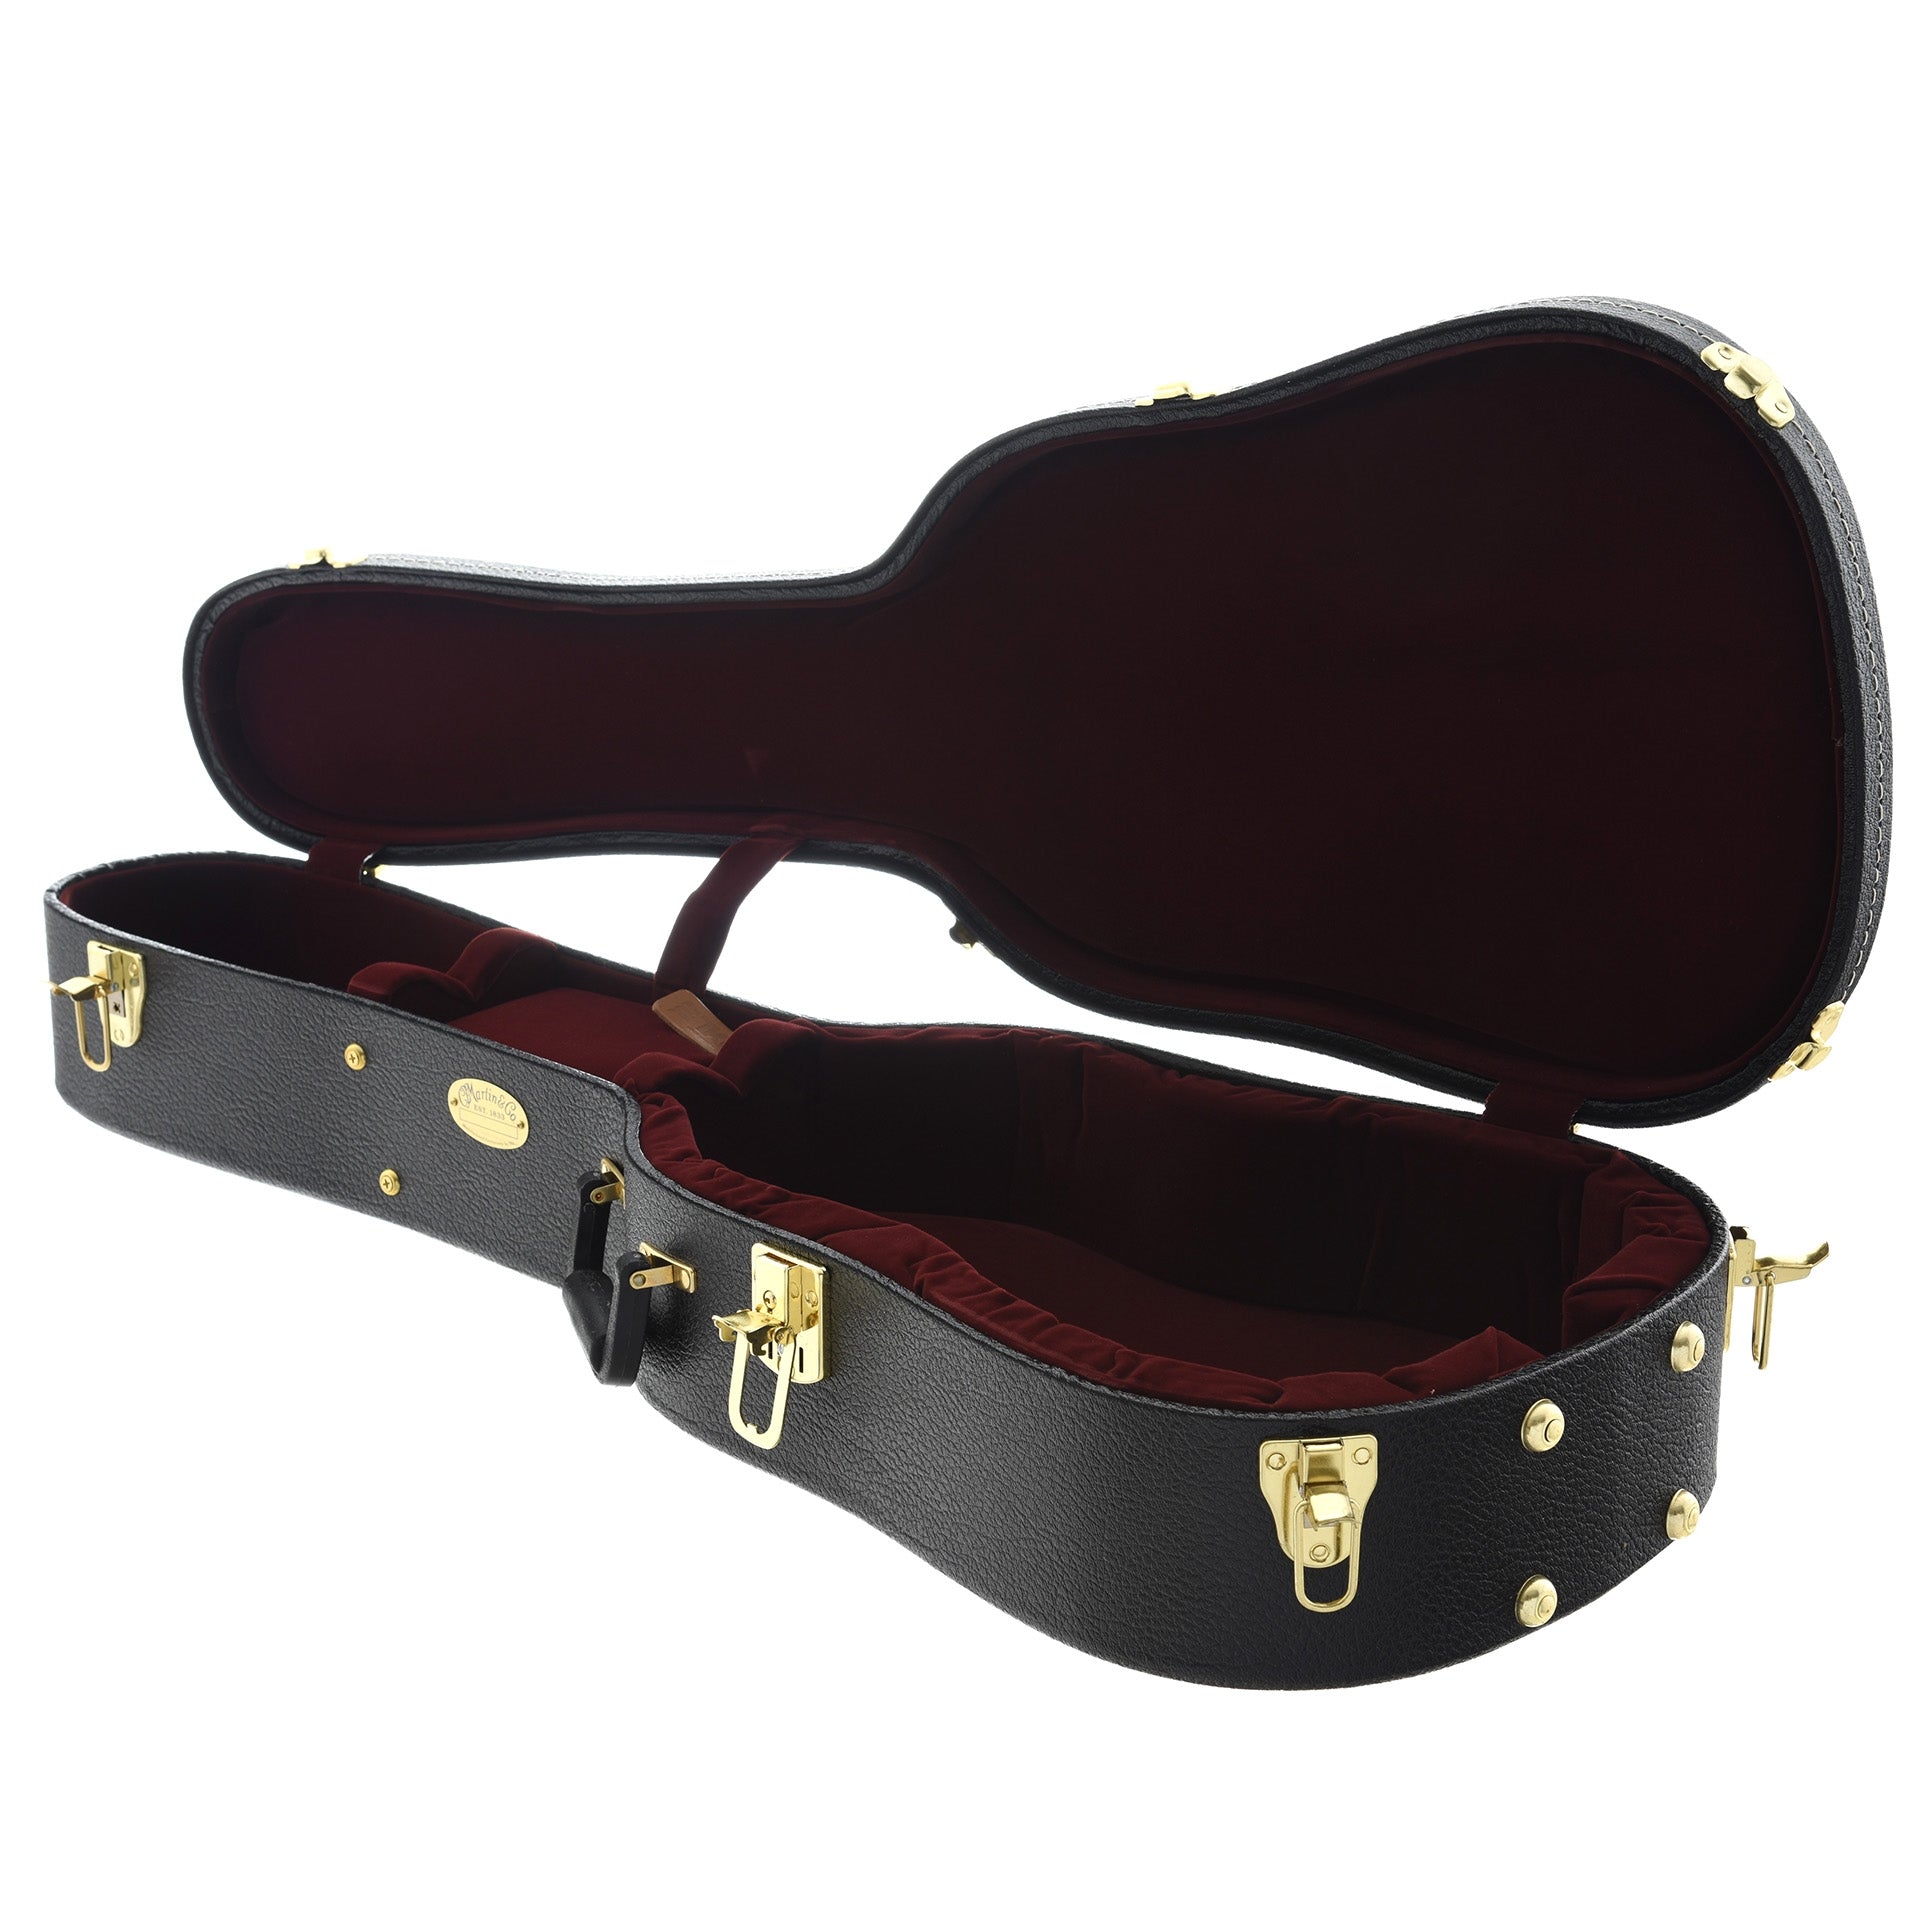 Full Inside and Side of Martin Mini (Size 5) Guitar Case